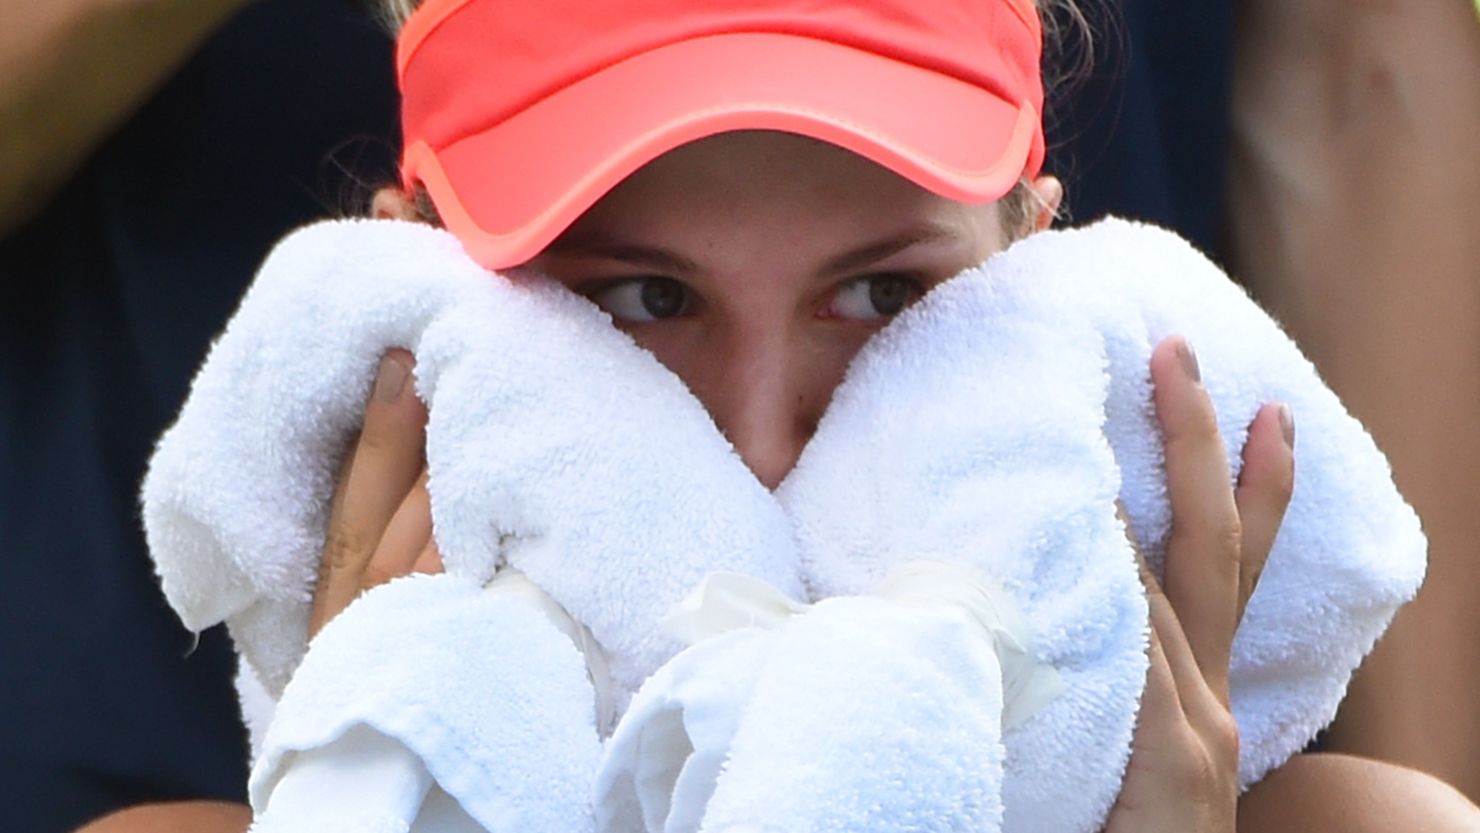 Eugenie Bouchard holds a towel to her face at the U.S. Open women's singles match on September 4, 2015 in New York. 